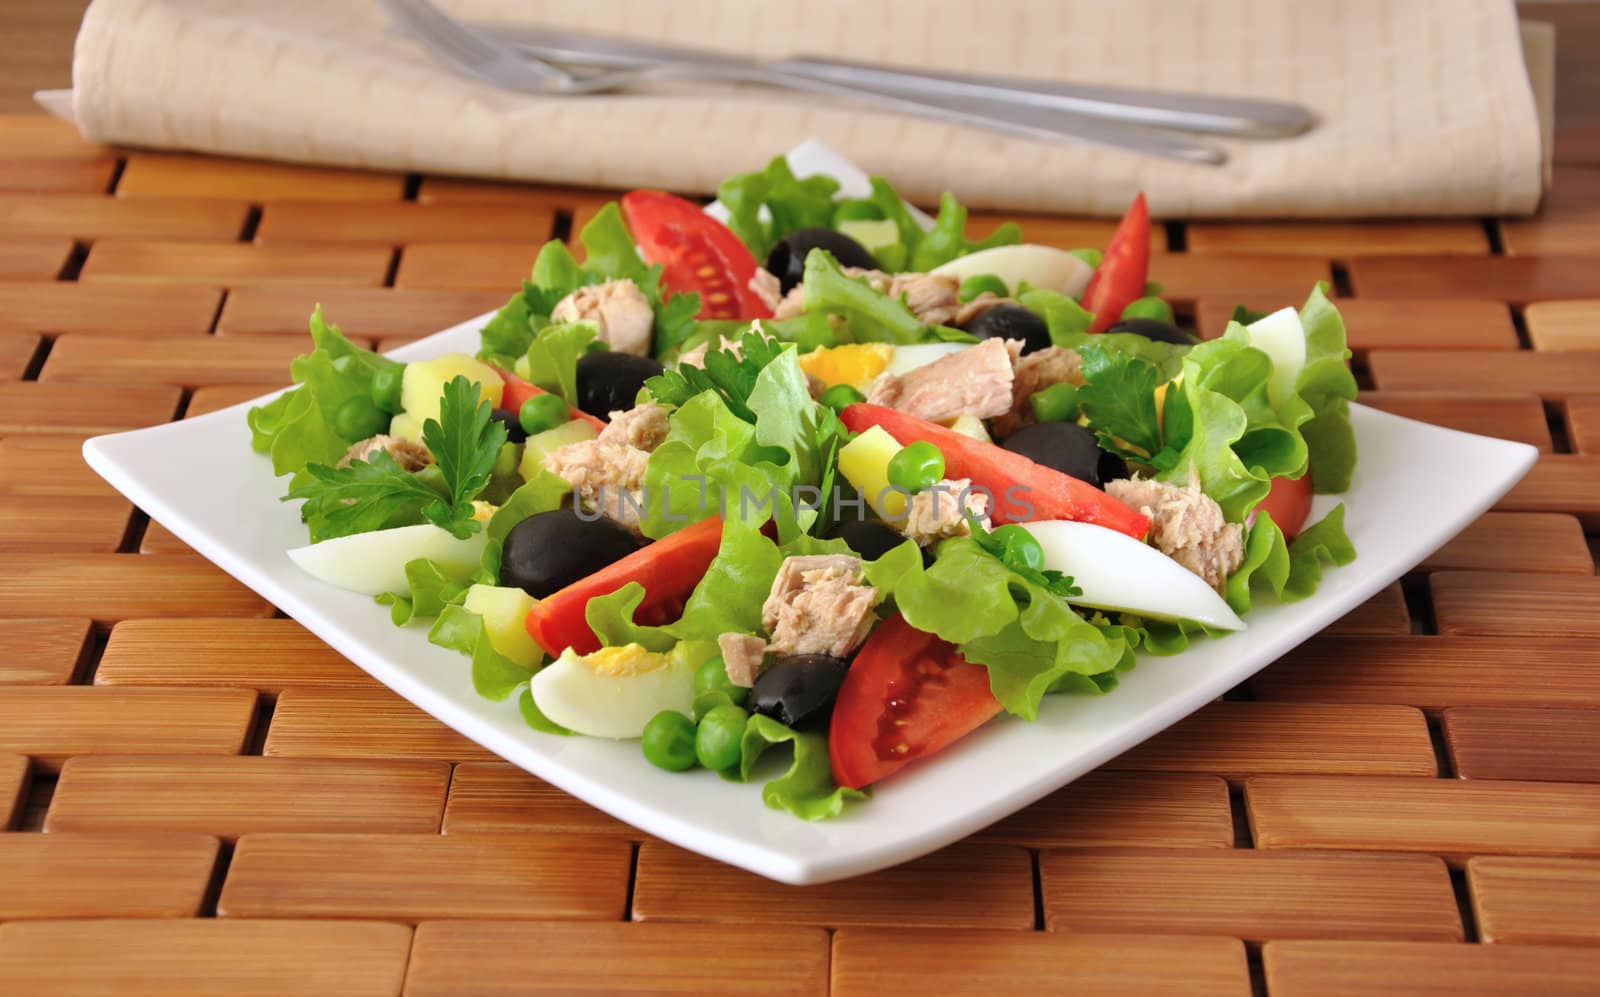 Vegetable salad with tuna and egg by Apolonia